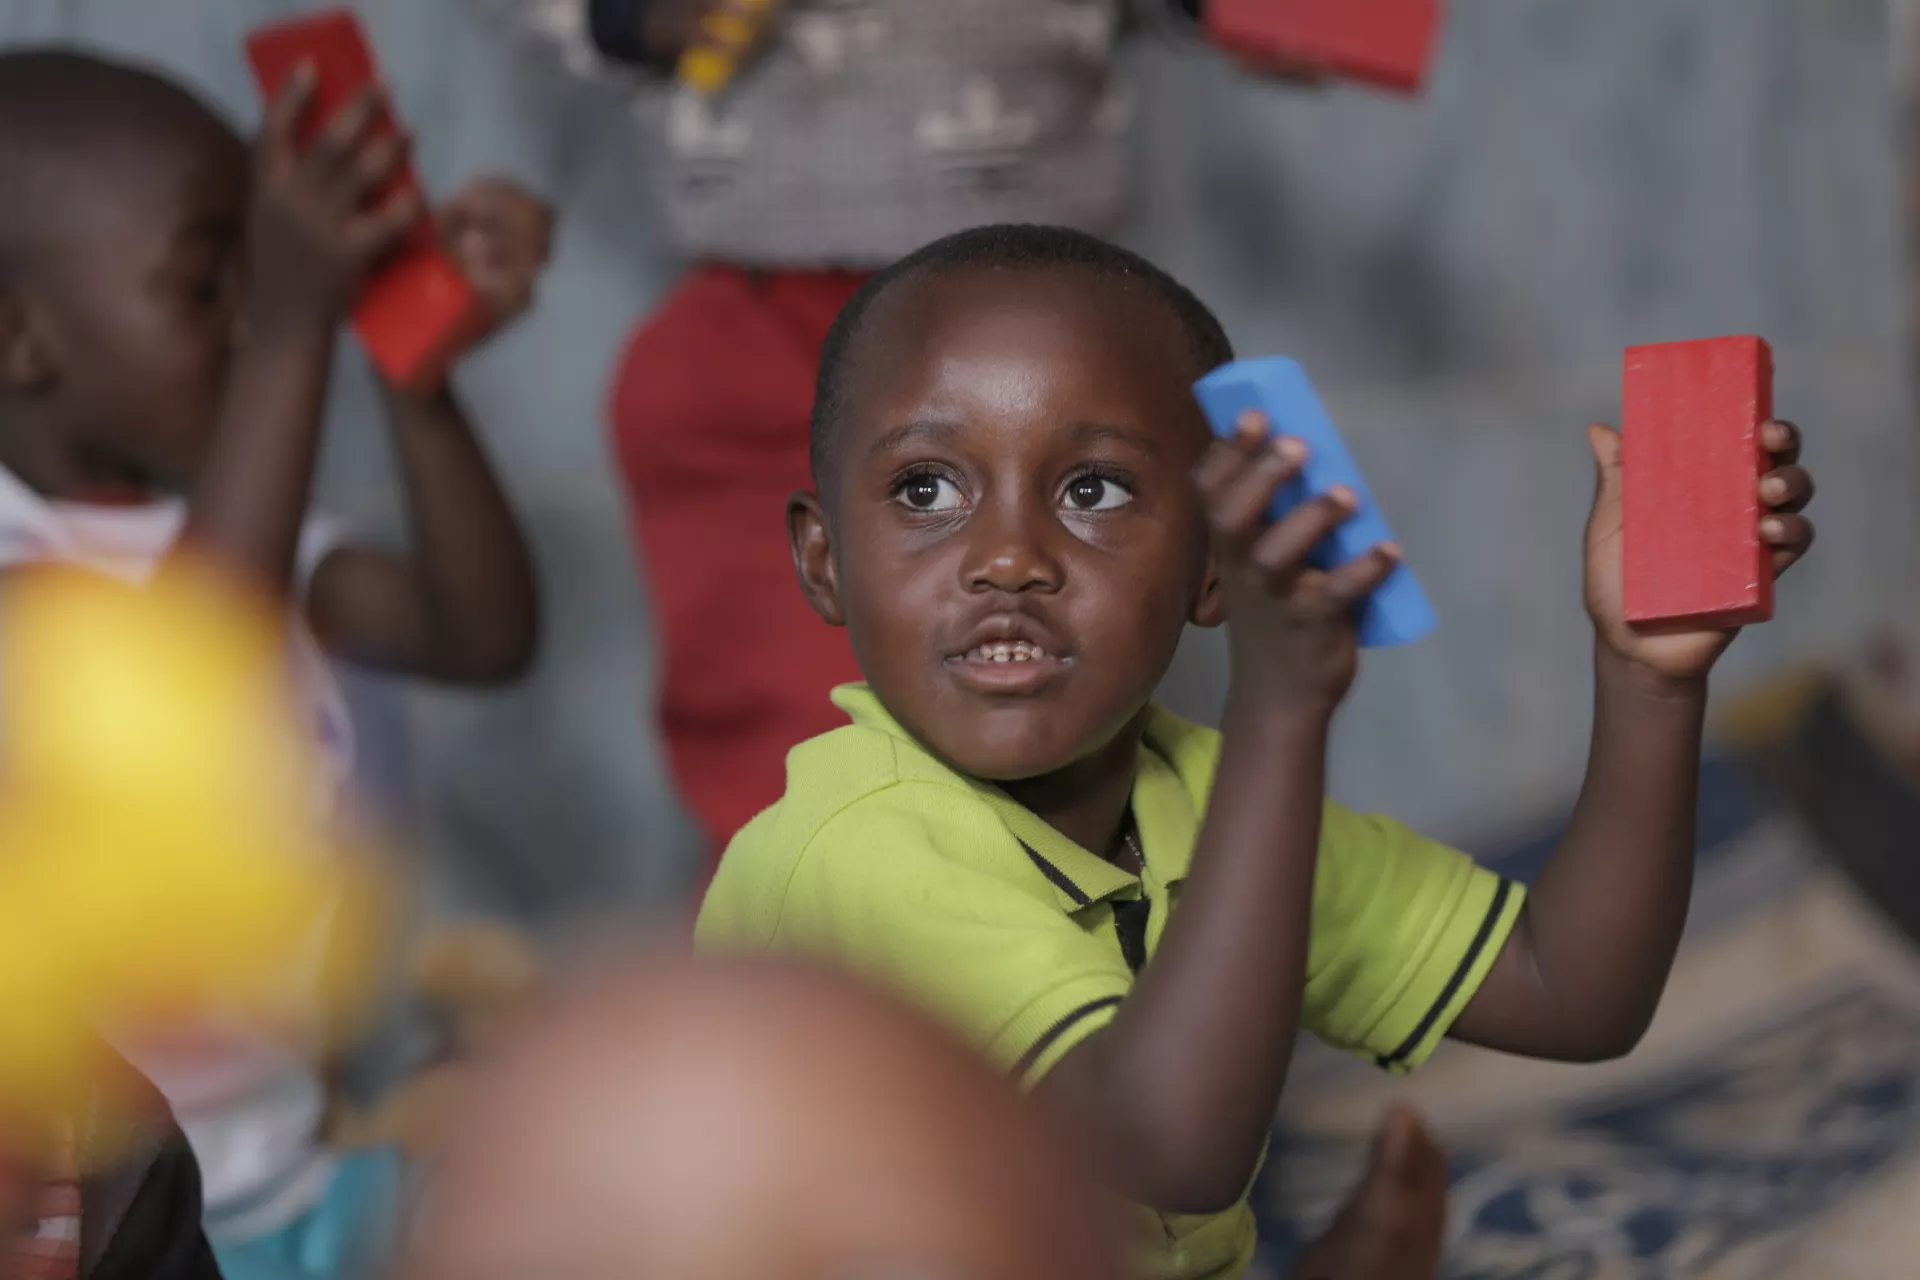 A young boy plays and learns with blocks in an early childhood development centre in Rwanda.